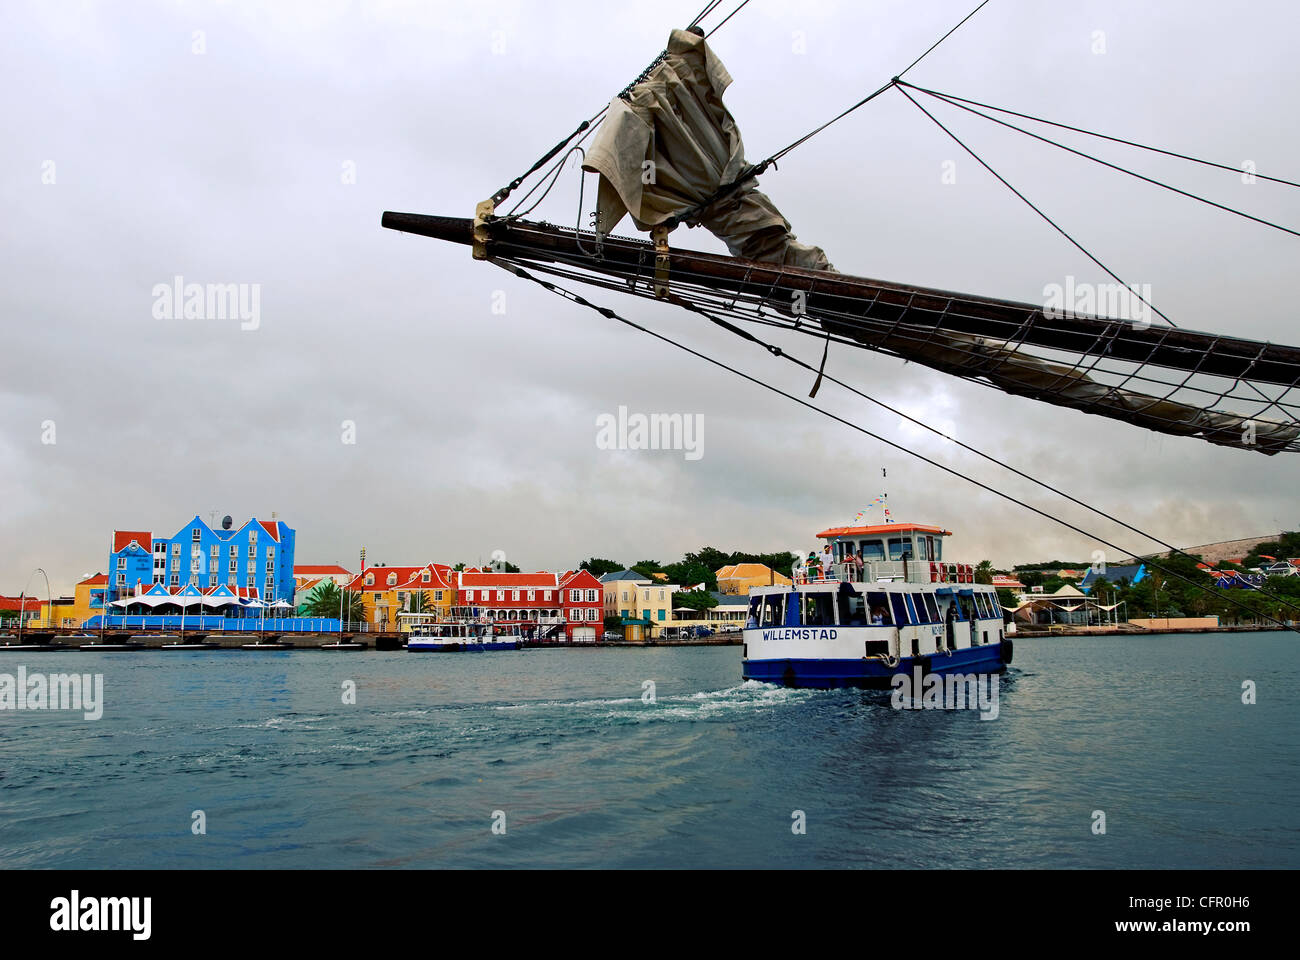 The Willemstad waterfront features the unique architecture of the Dutch Antilles. Stock Photo